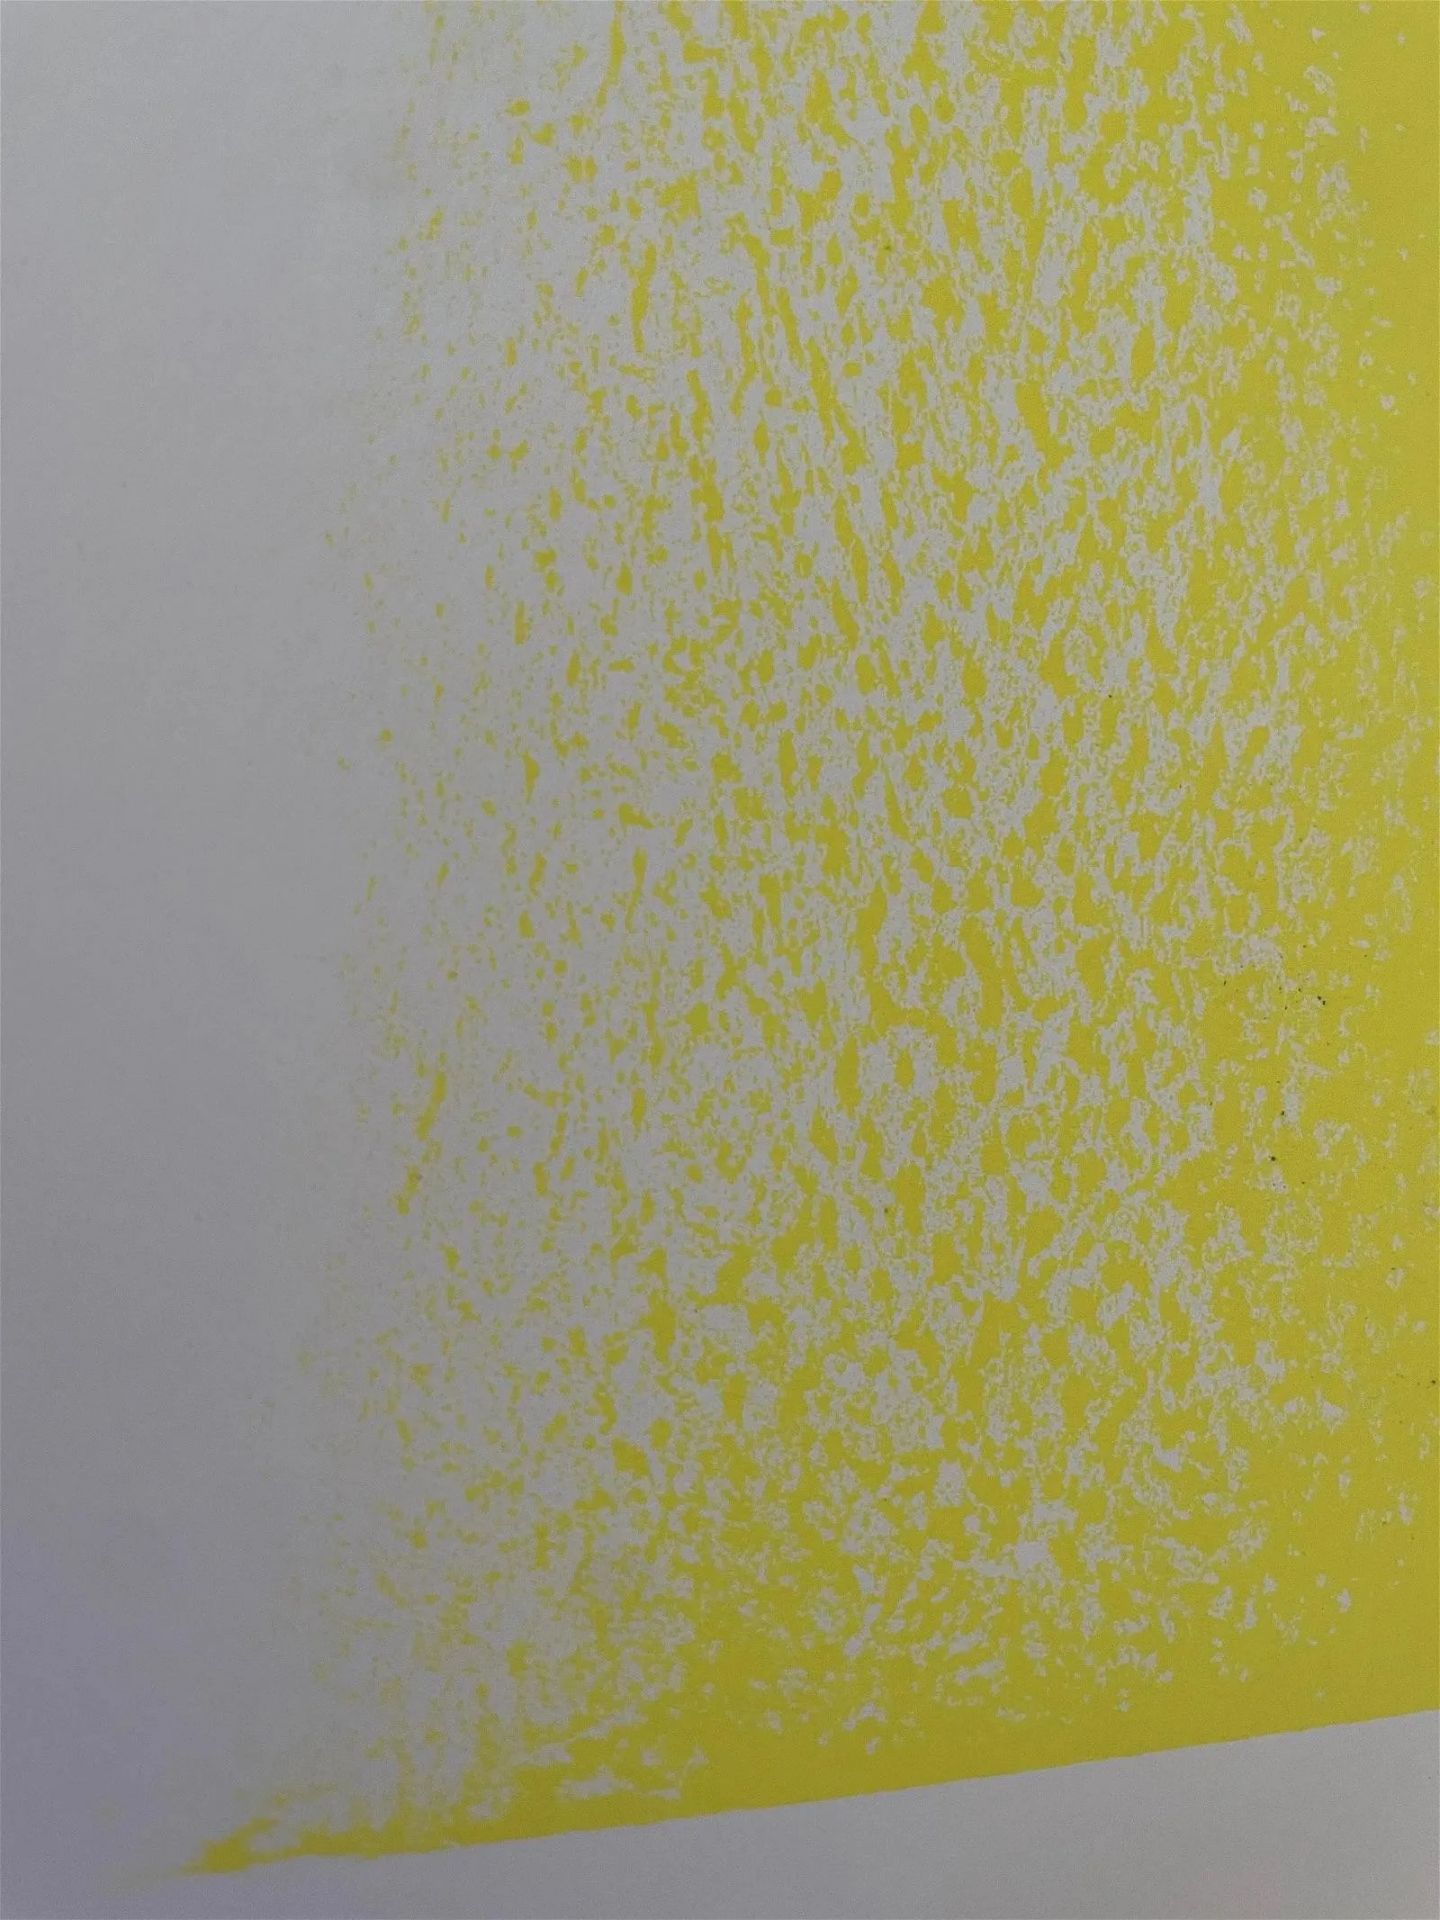 Richard Anuszkiewicz "Yellow Reversed, 1970" Offset Lithograph, Plate Signed, Dated - Image 4 of 6